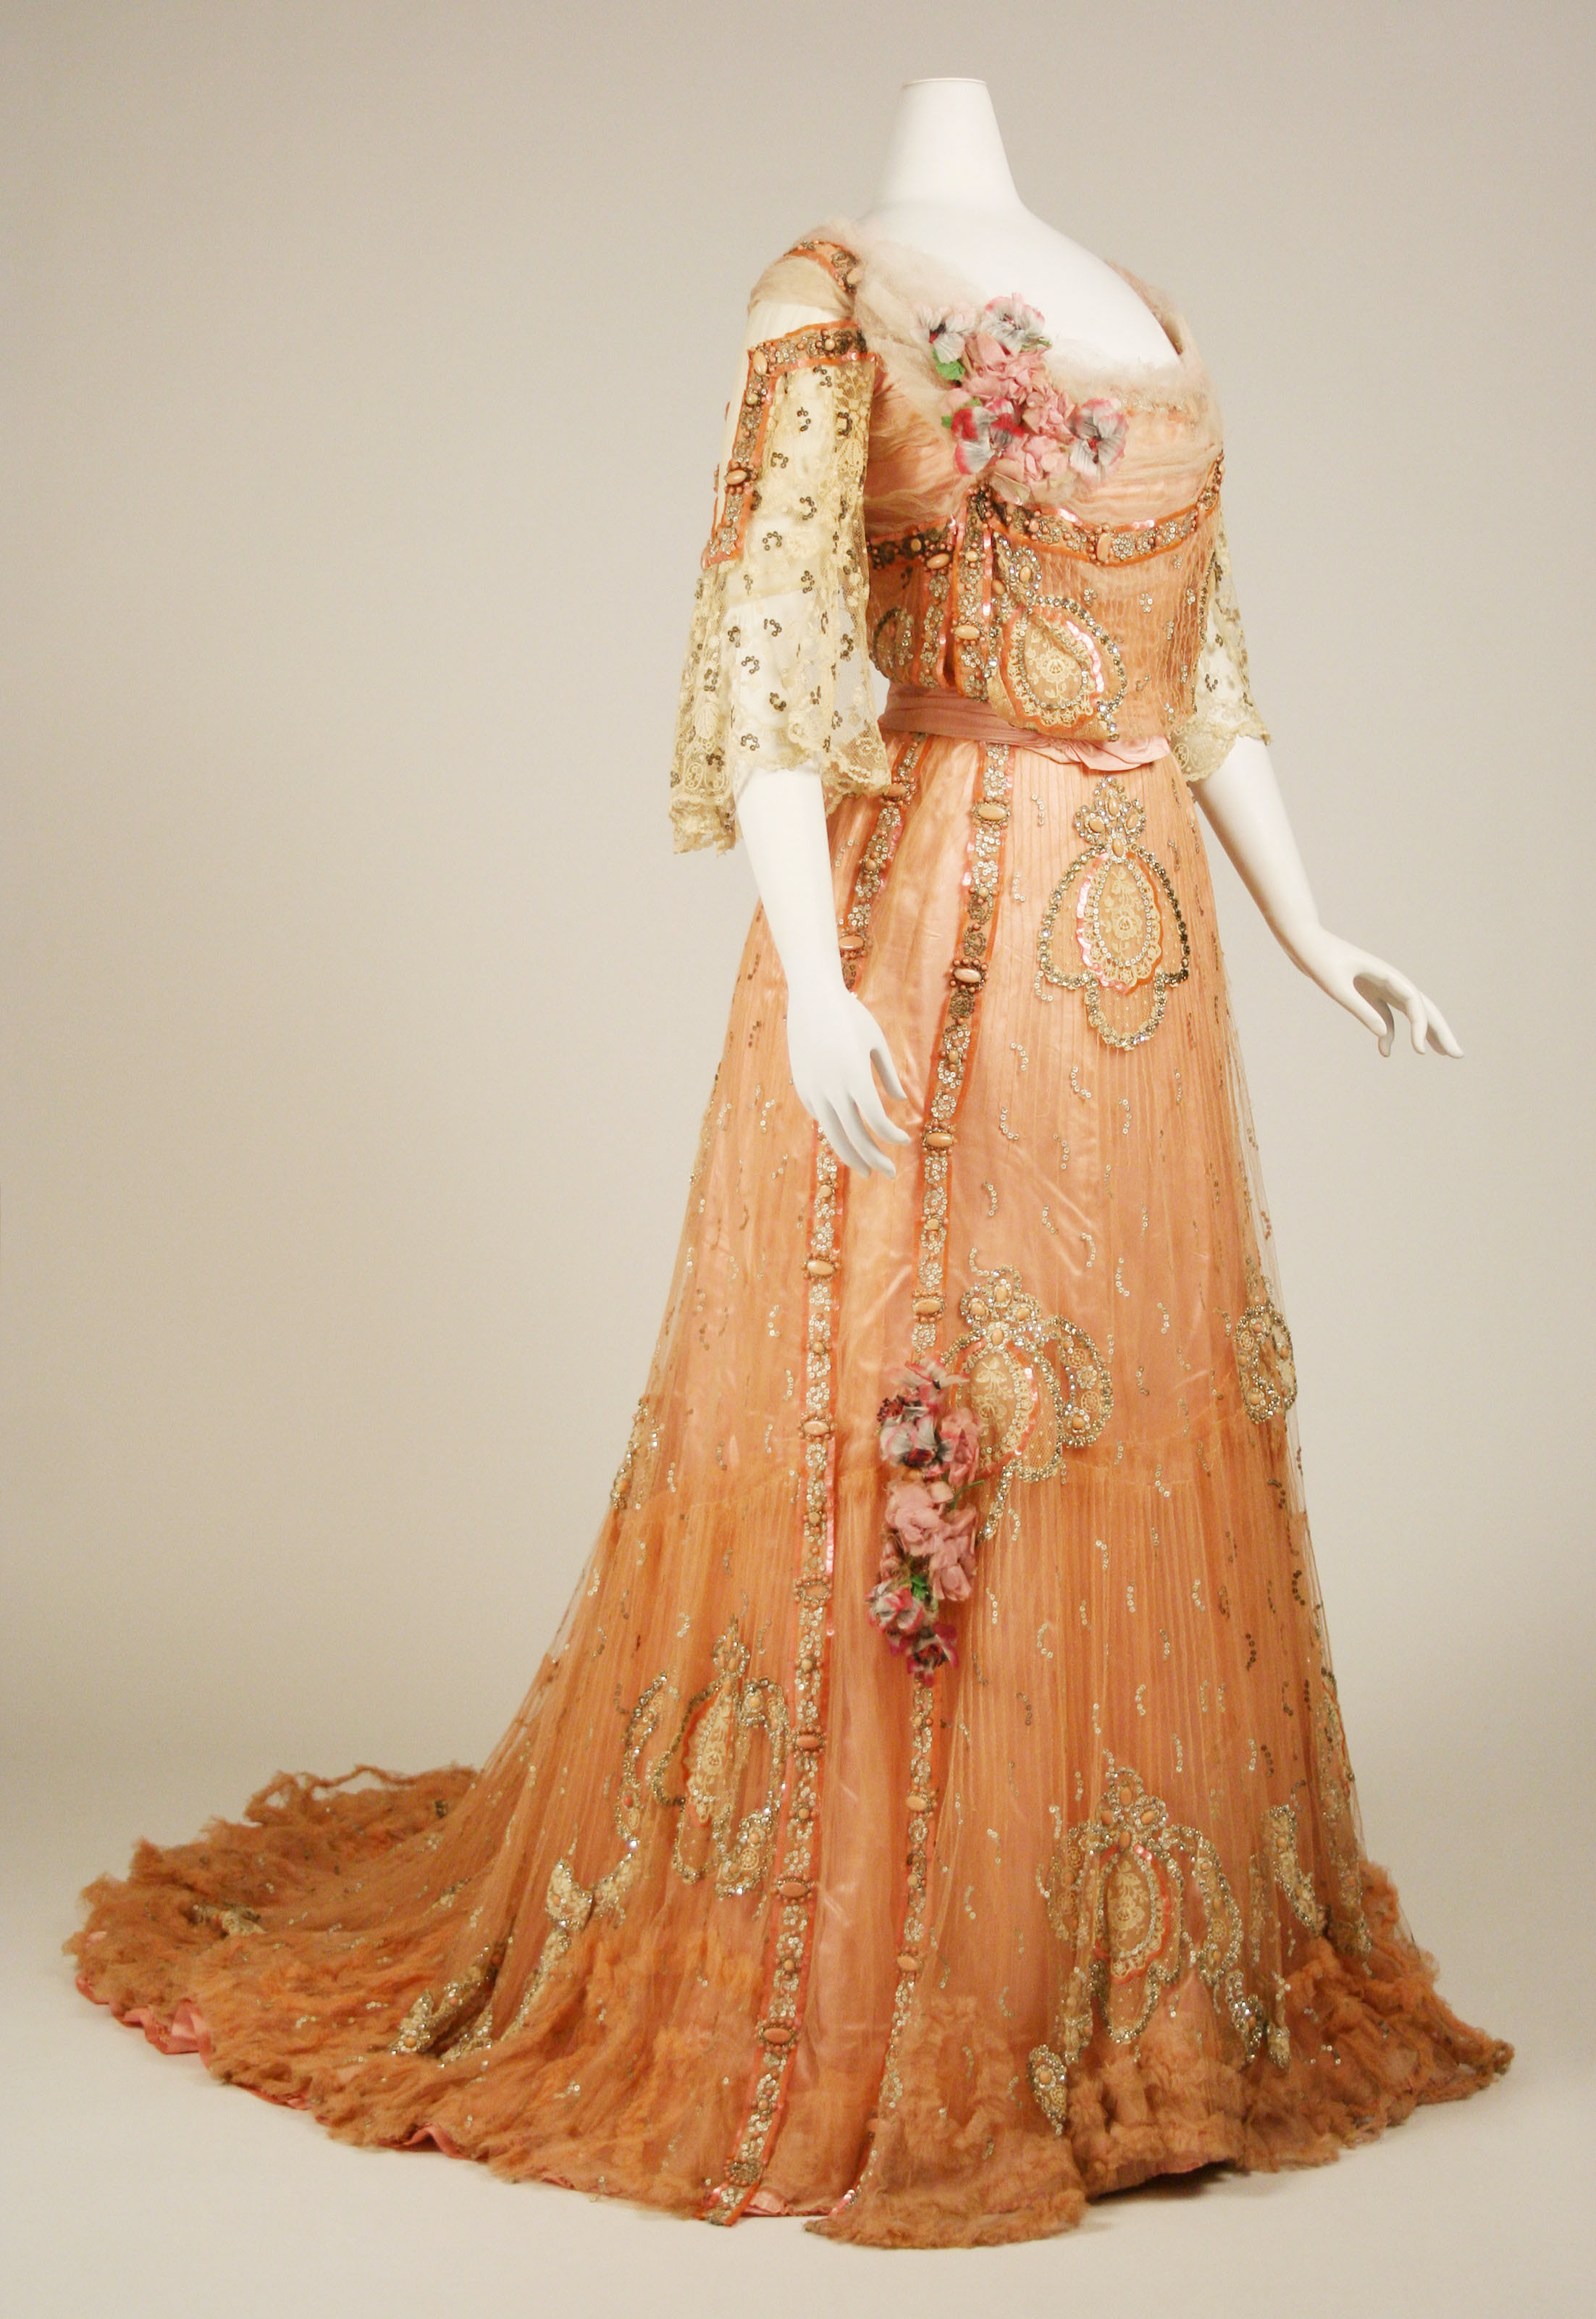 Ball gown | French | The Metropolitan Museum of Art